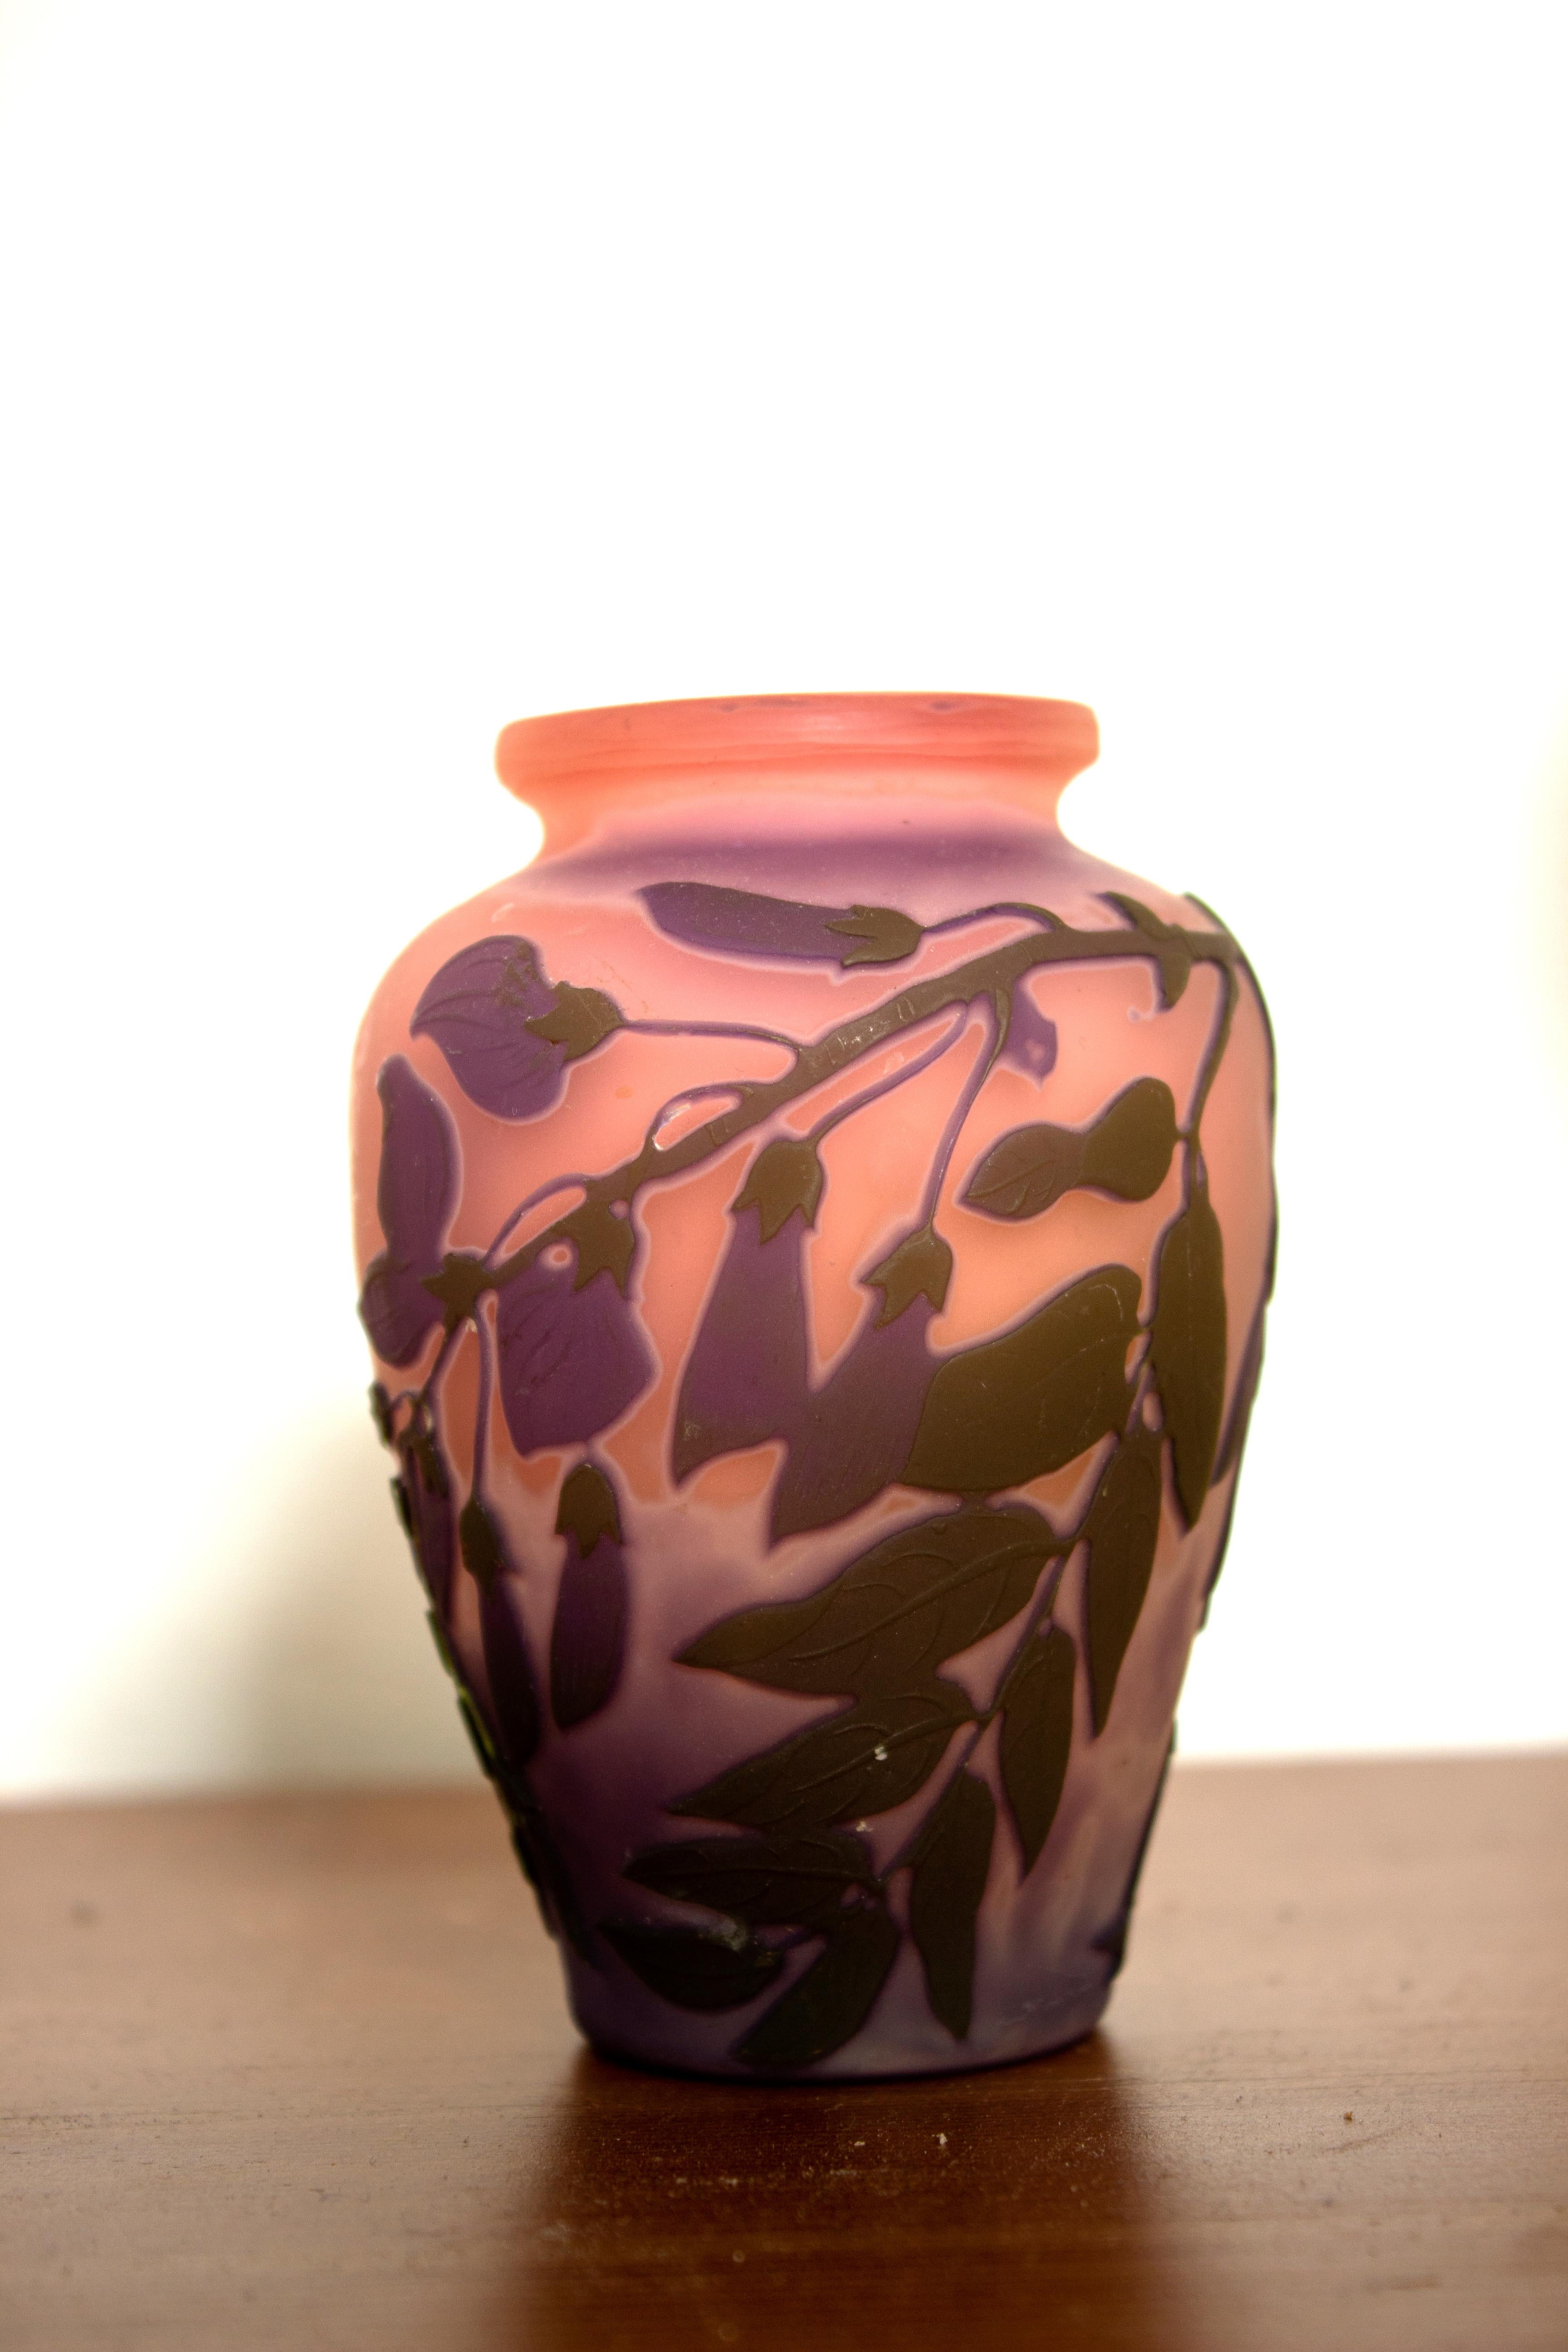 Baluster vase by Emile Galle, circa 1900.
The baluster cameo art glass vase shows acid cut lilacs and detailed leaves against a violet ground. The colours are superb.
The vase has the Galle mark as shown.
This piece is in excellent condition with